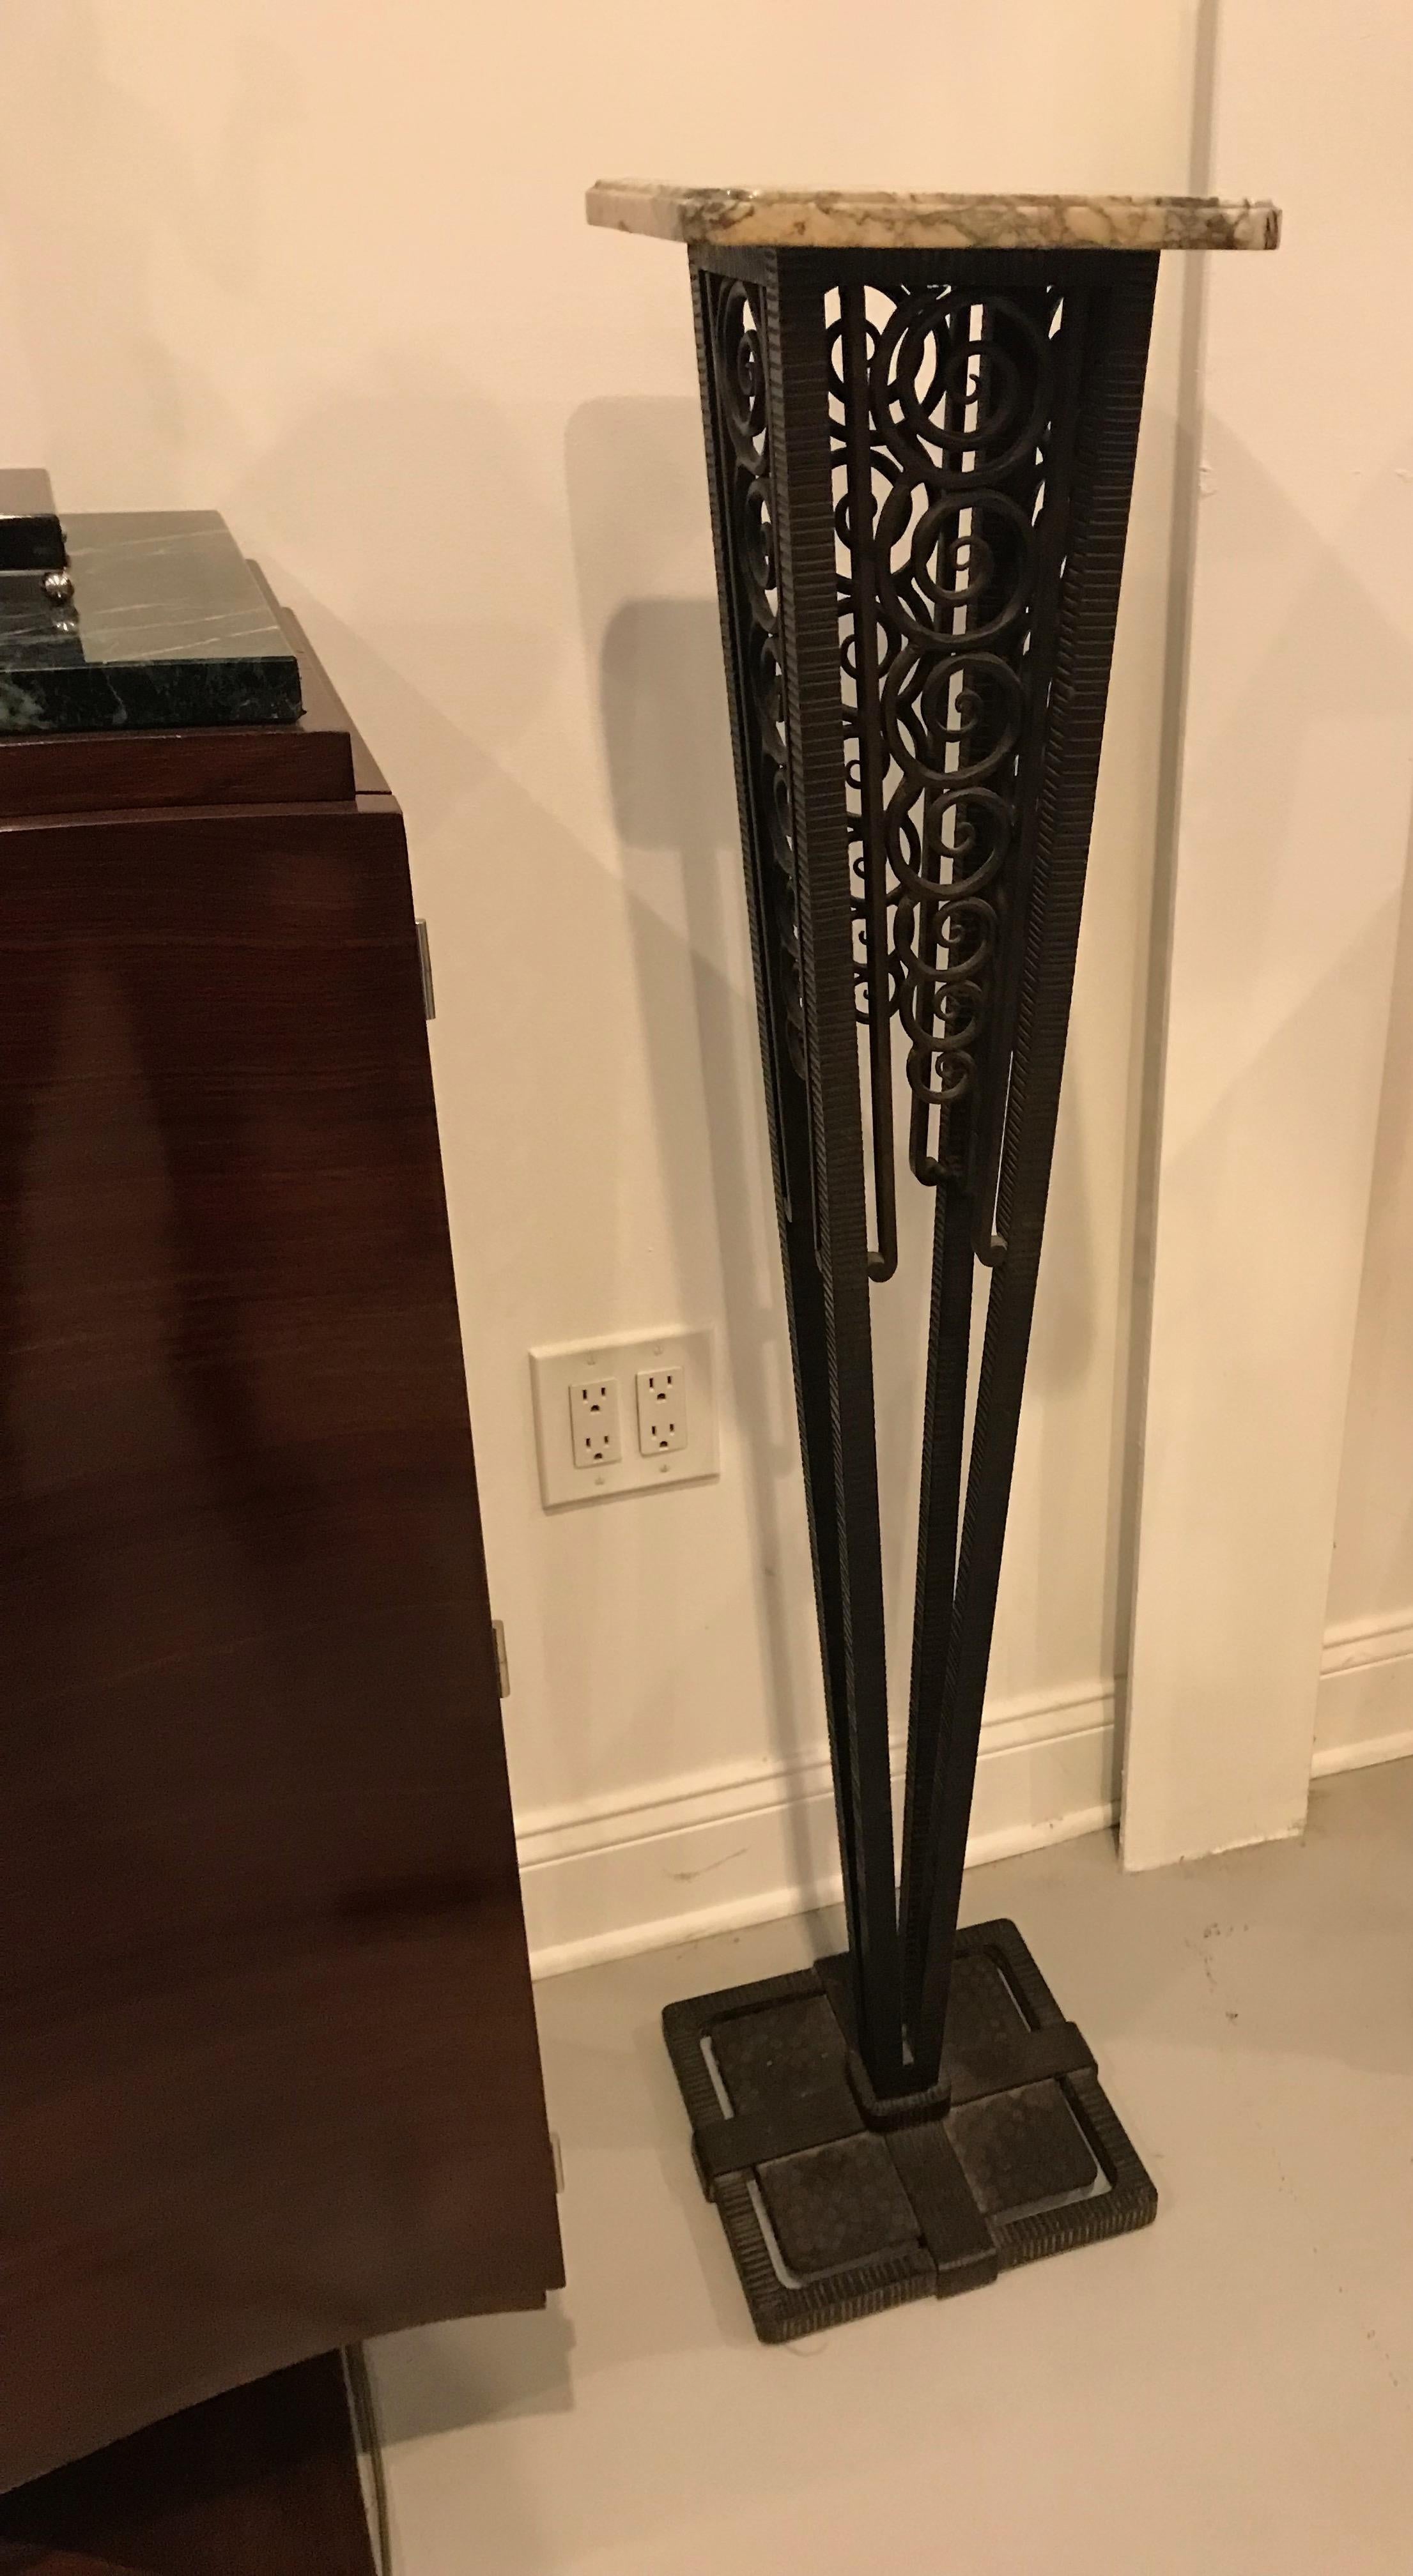 French Art Deco wrought iron pedestal table having marble top. Perfect accent table to have a table lamp or vase sit on. 

Marble top dimensions: 
Width 10 inches
Length 10 inches.